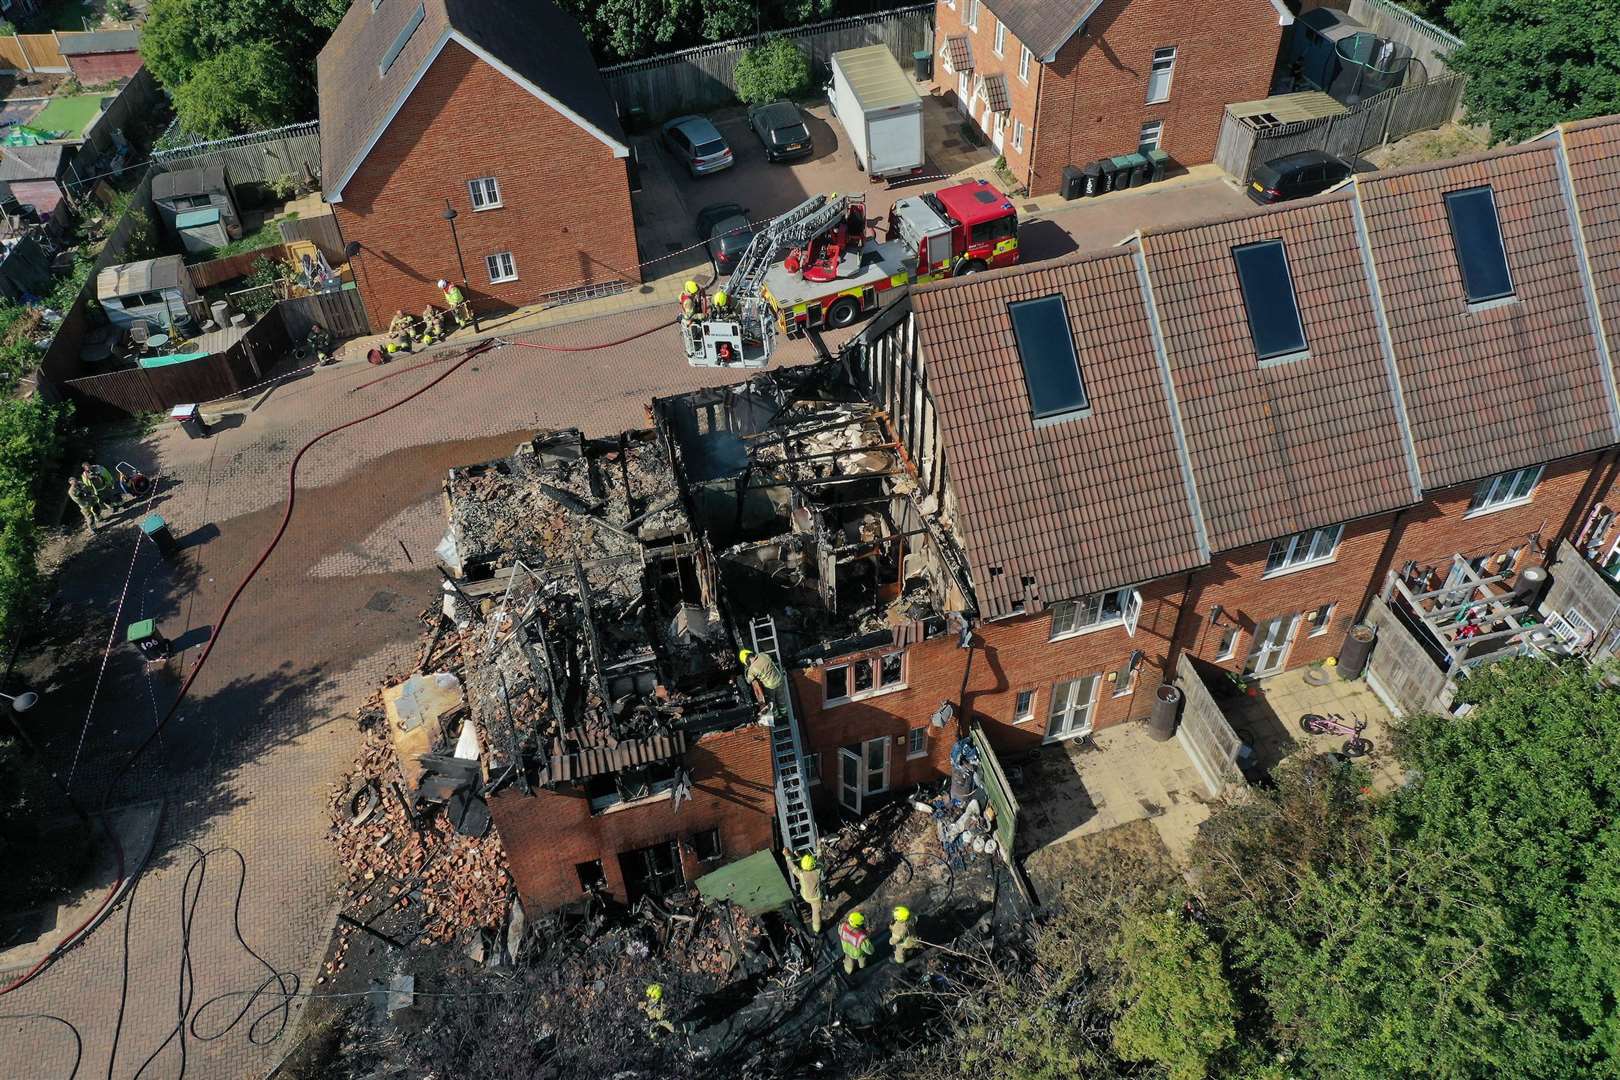 Multiple properties were damaged by the blaze. Picture: UKNIP